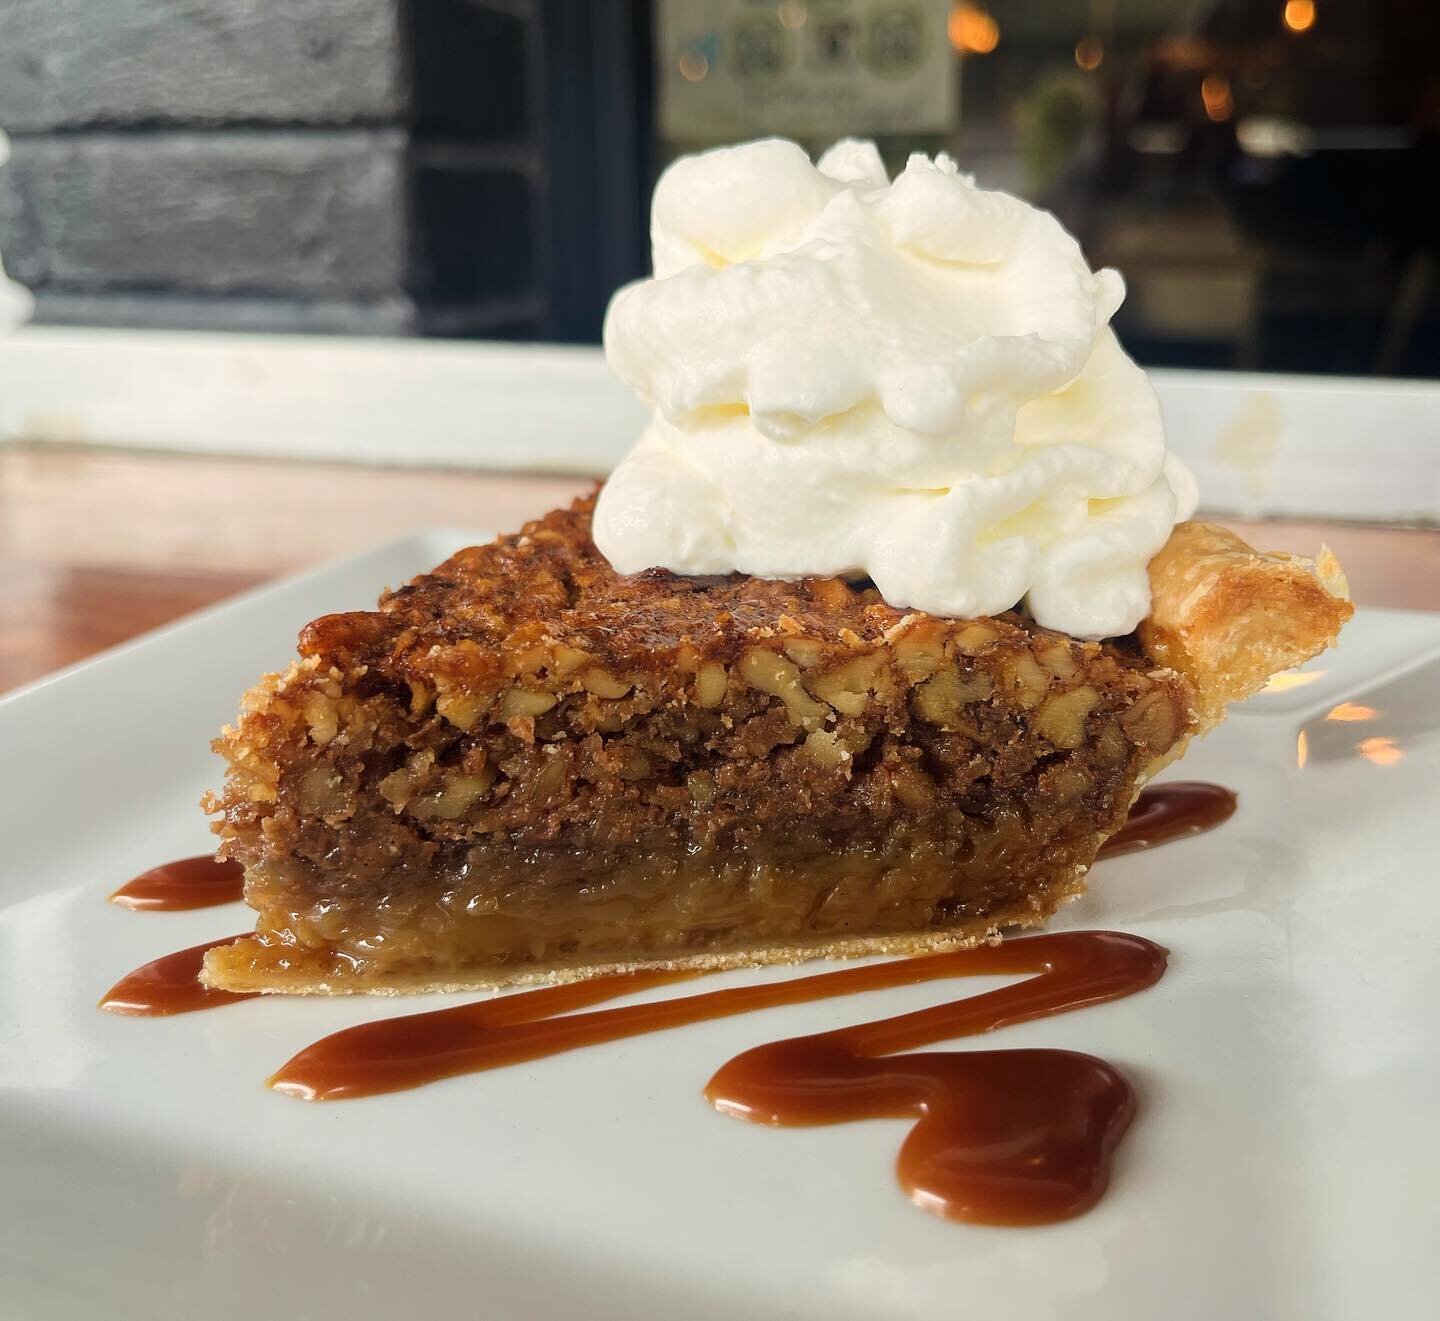 Sexy Thing: Walnut Pie never looked this good 😋#sexyfood #southiami #dessertsofinstagram #miamifoodie @whiskgourmet #somi